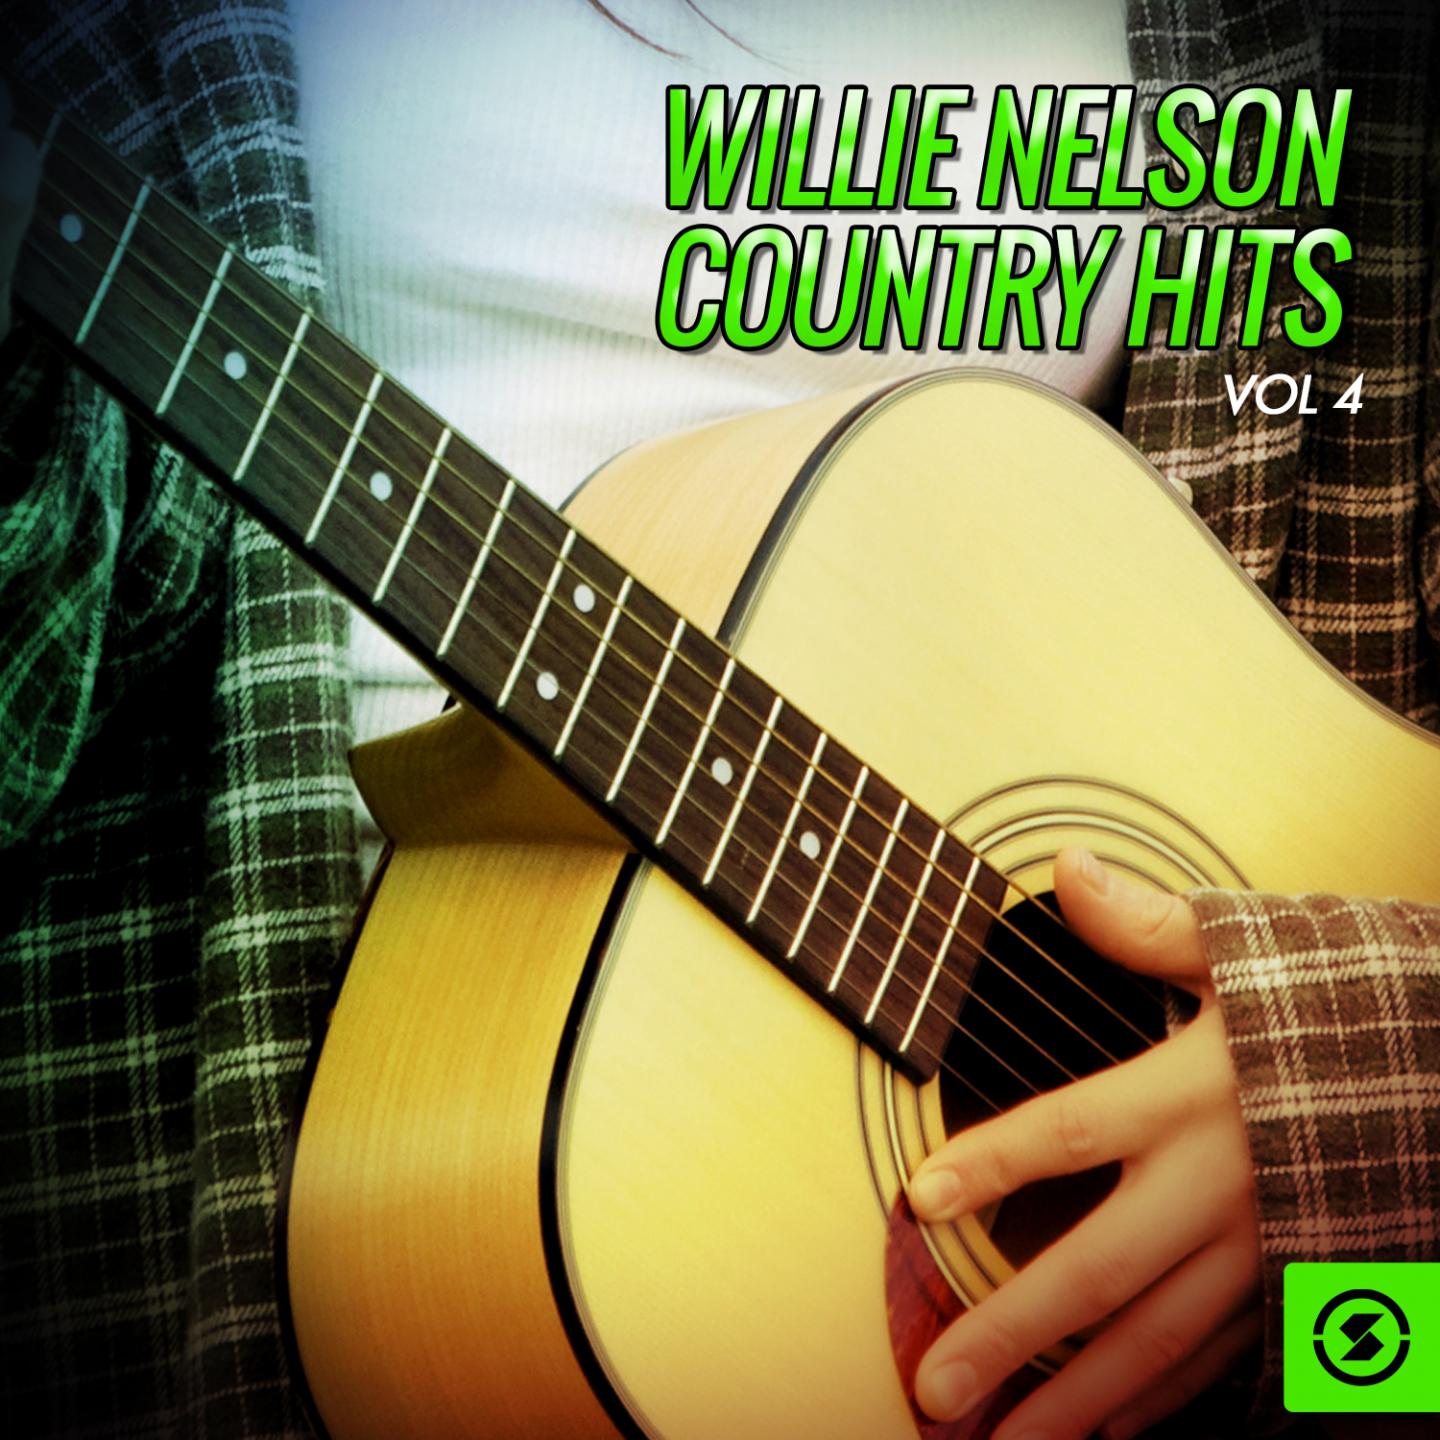 Willie Nelson Country Hits, Vol. 4